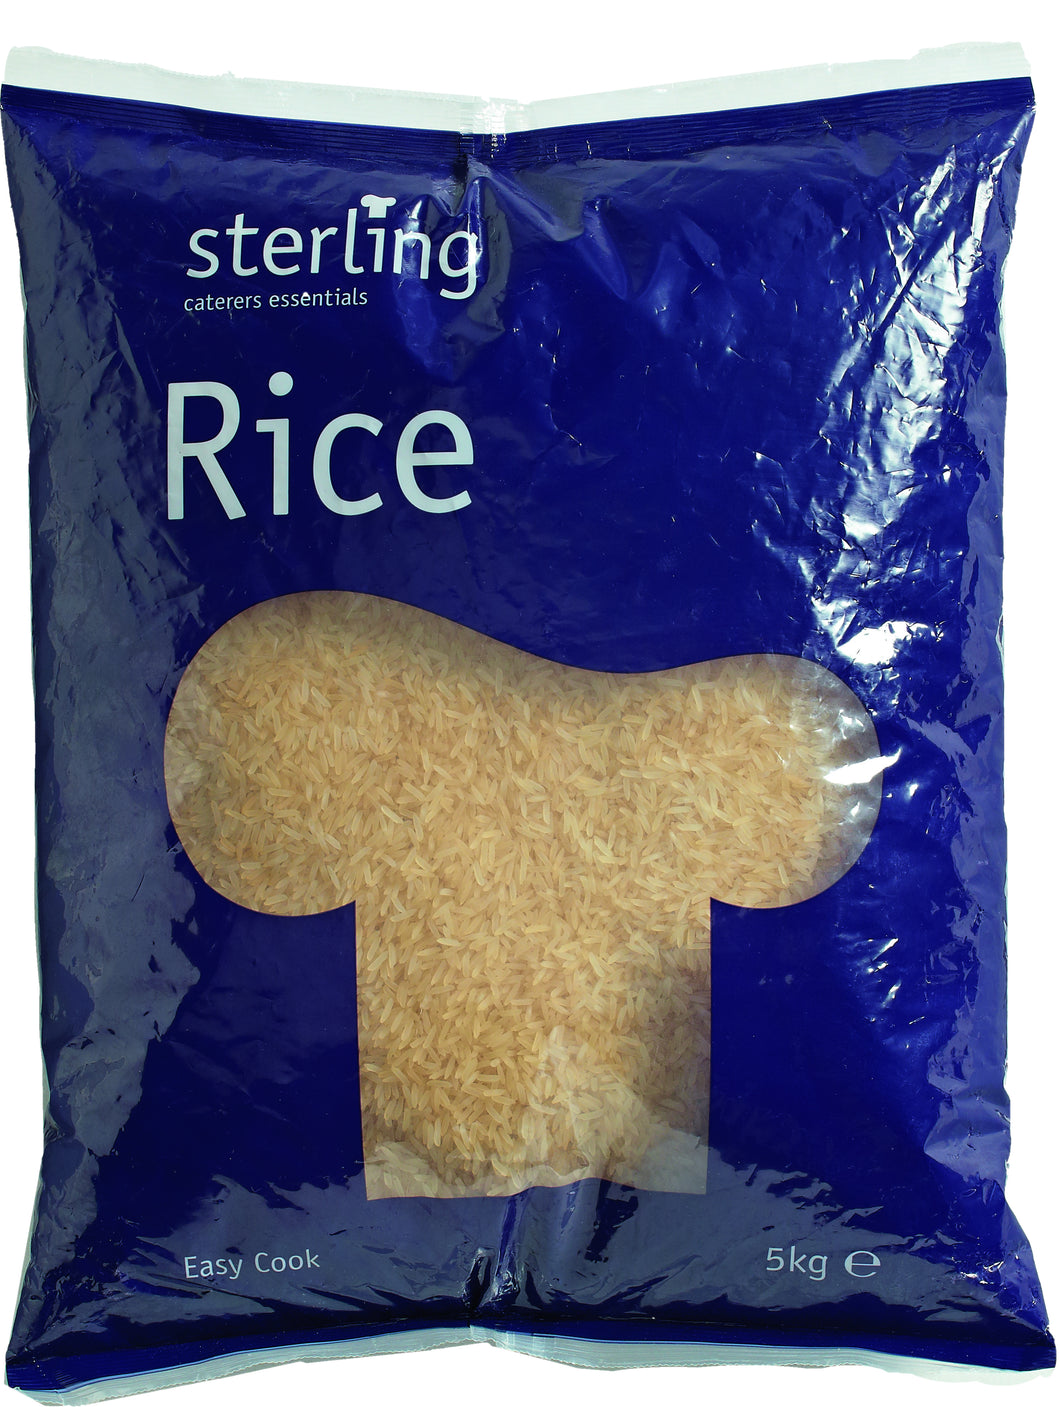 Easy Cook Rice (5kg)